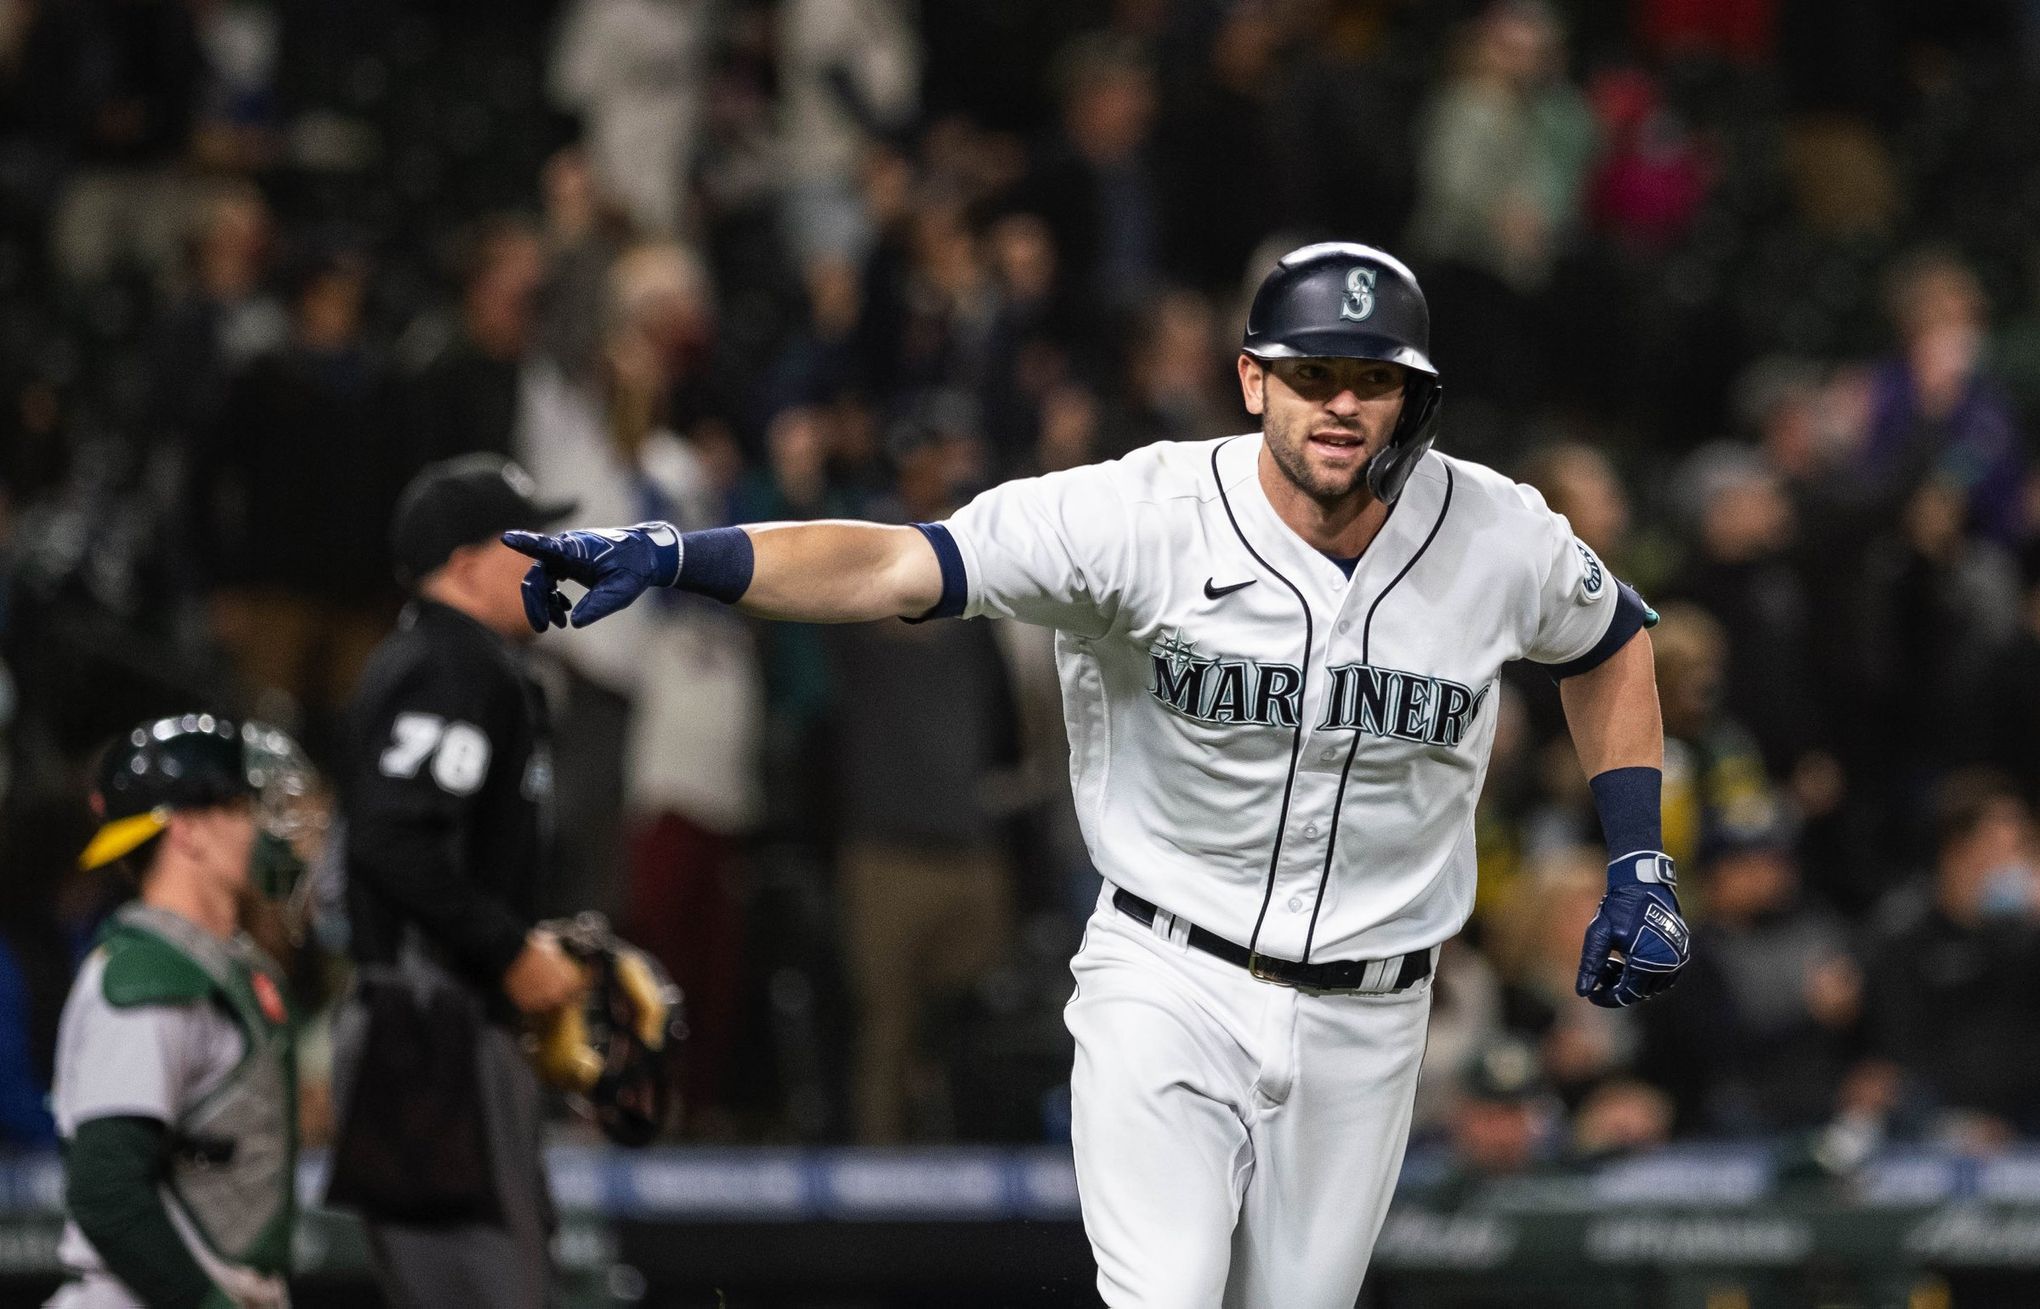 If anybody has seen Mitch Haniger's home-run ball, please contact the  Mariners